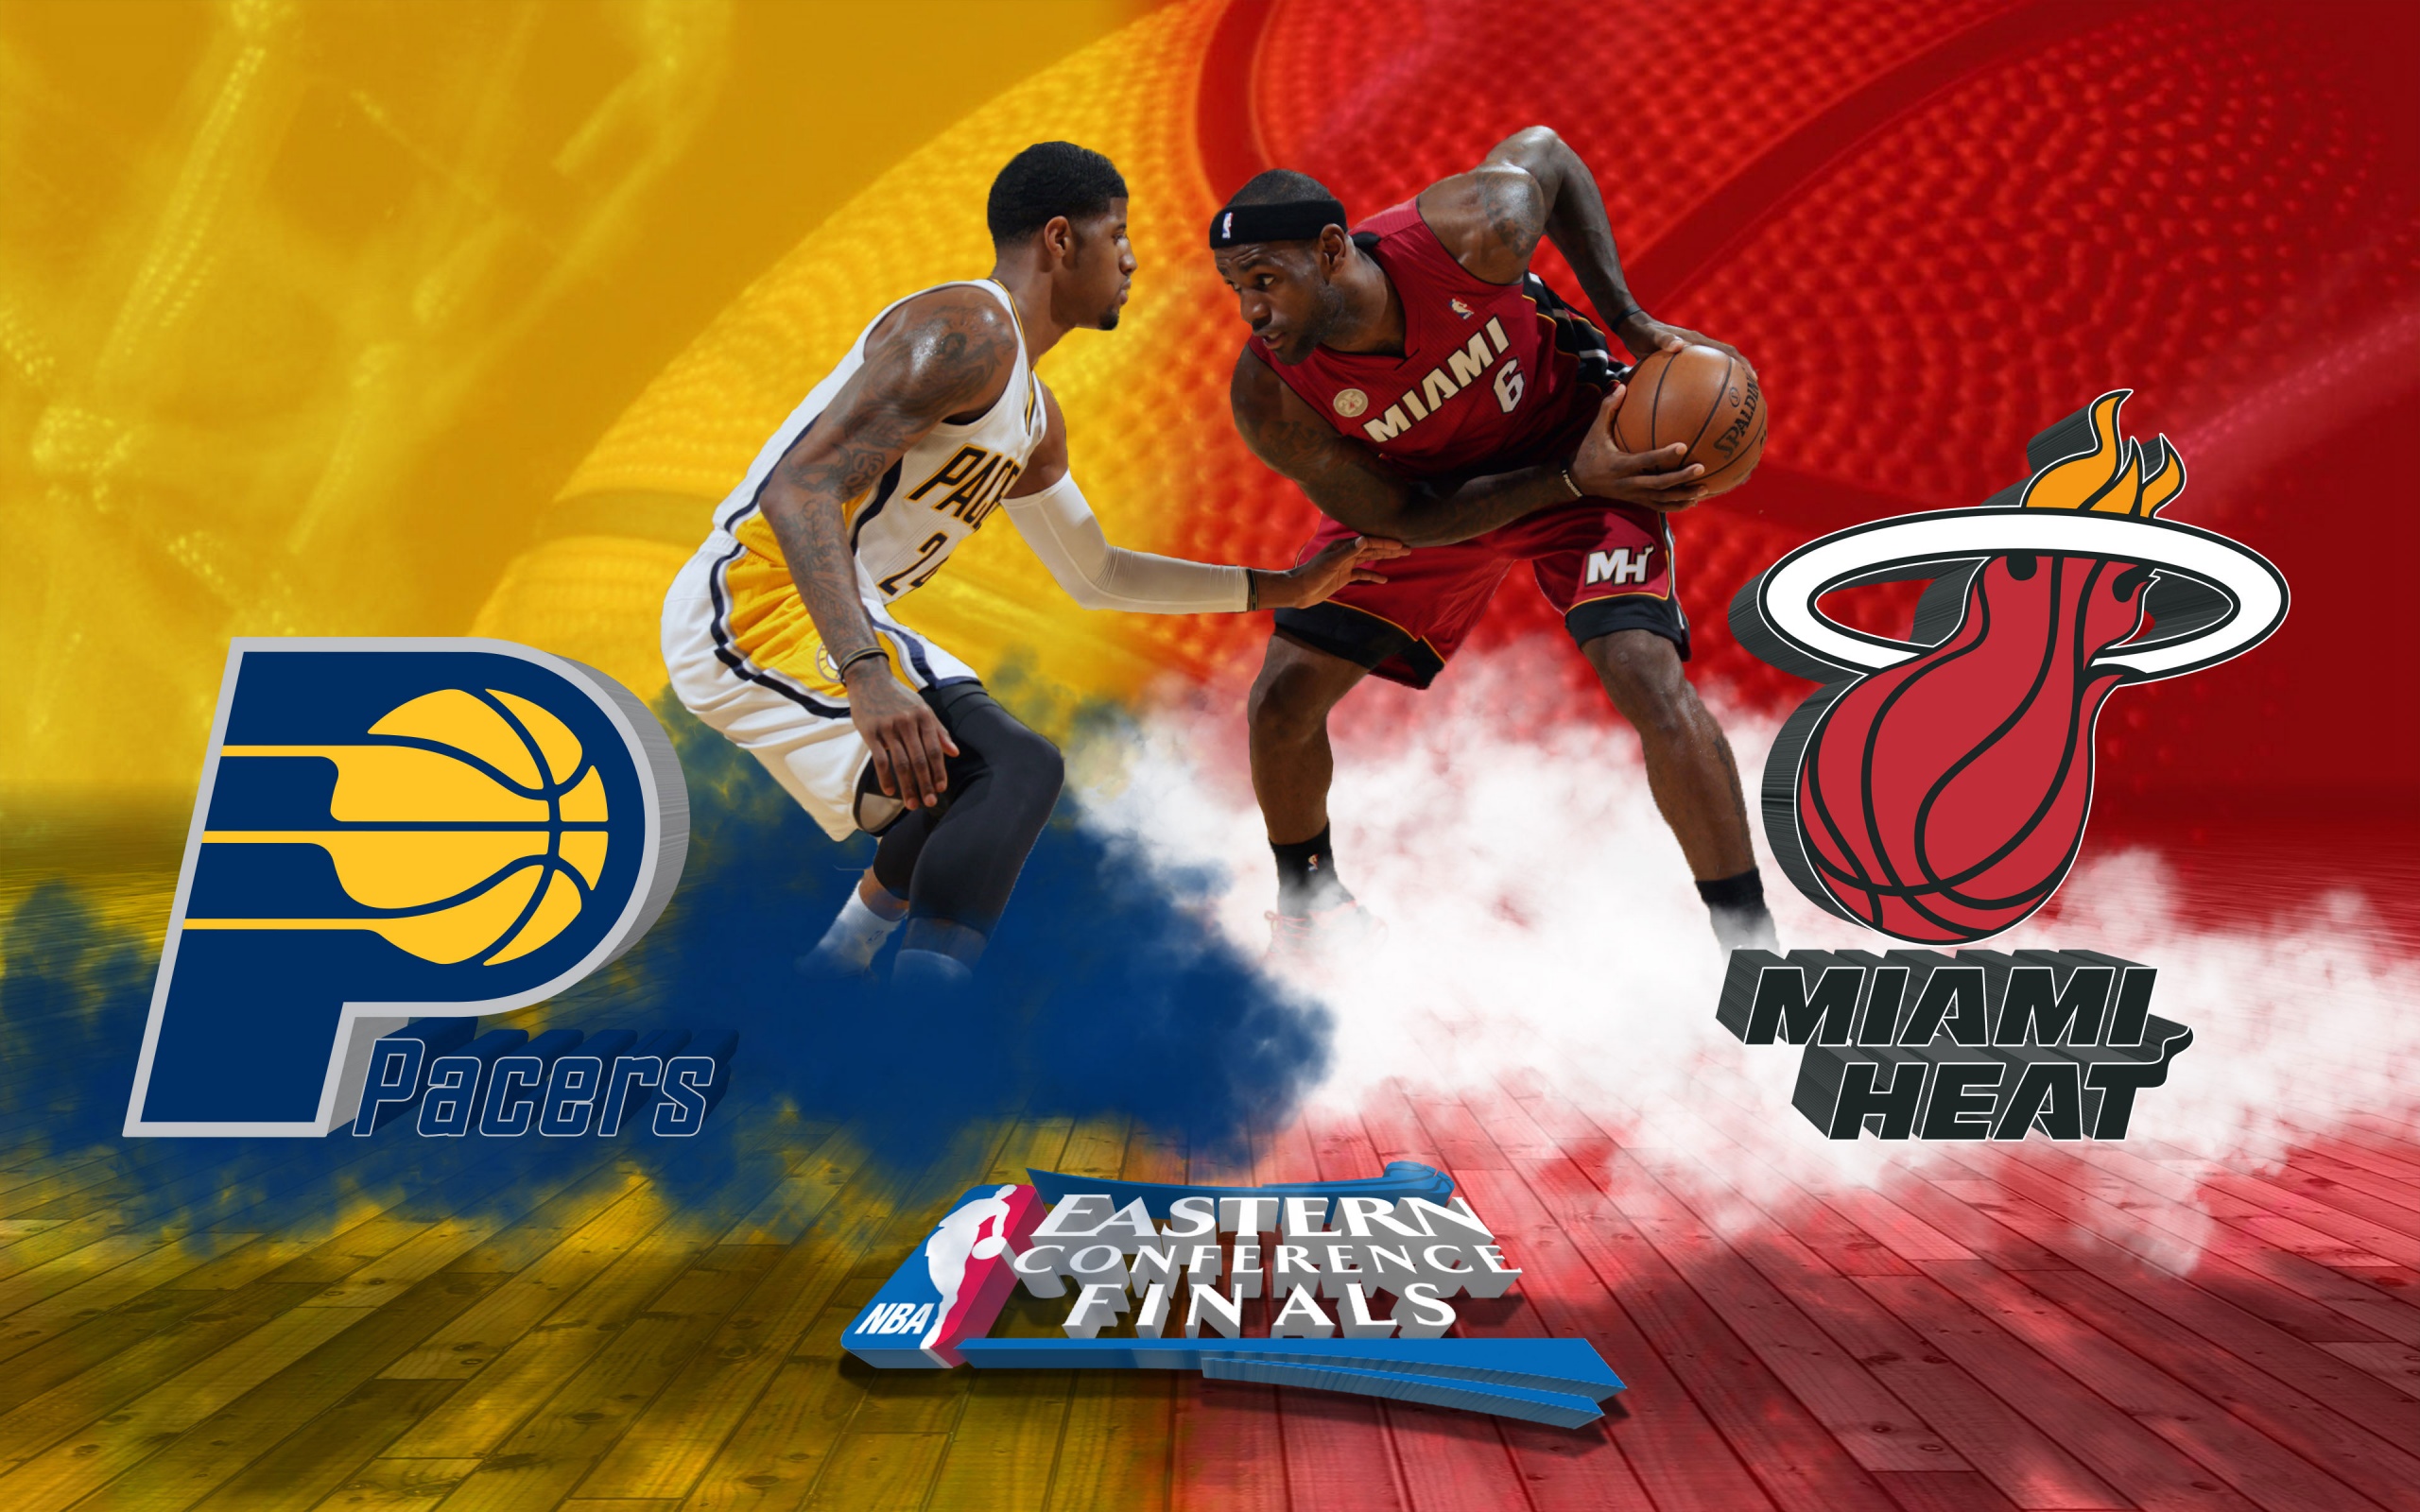 Indiana Pacers Vs Miami Heat 2014